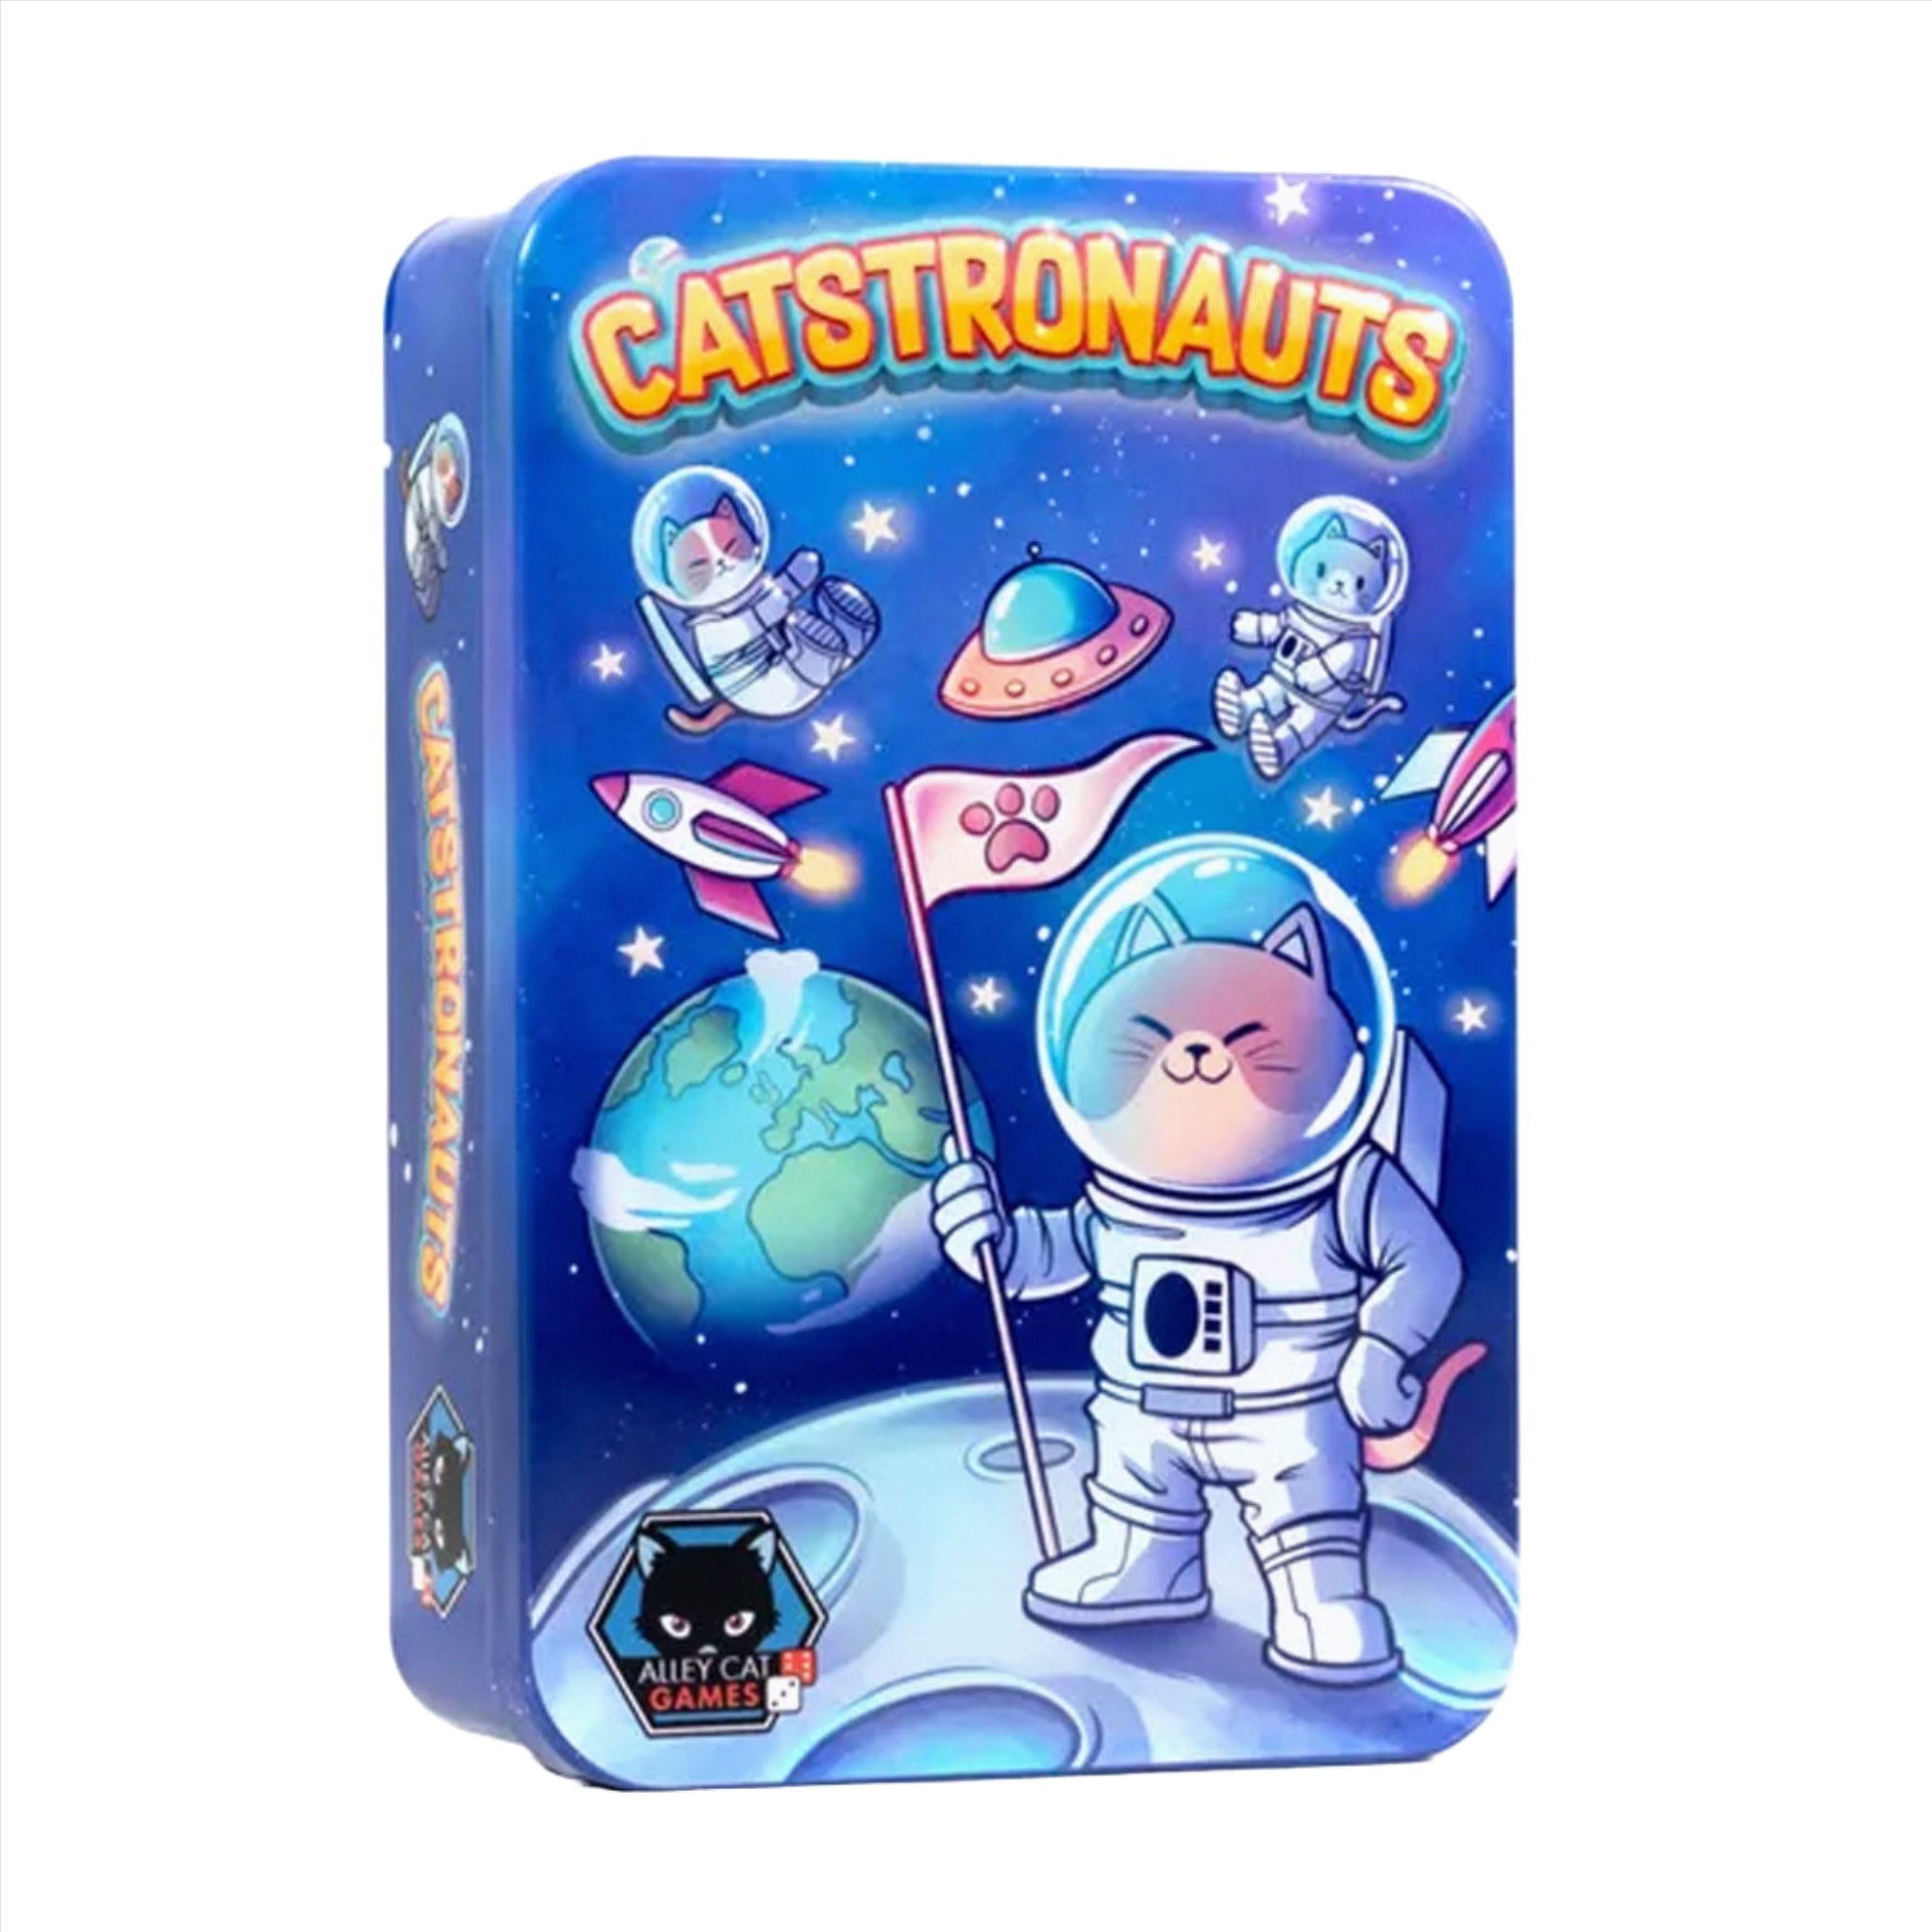 An image of Buy Alley Cat Games - Catstronauts at Small Smart UK